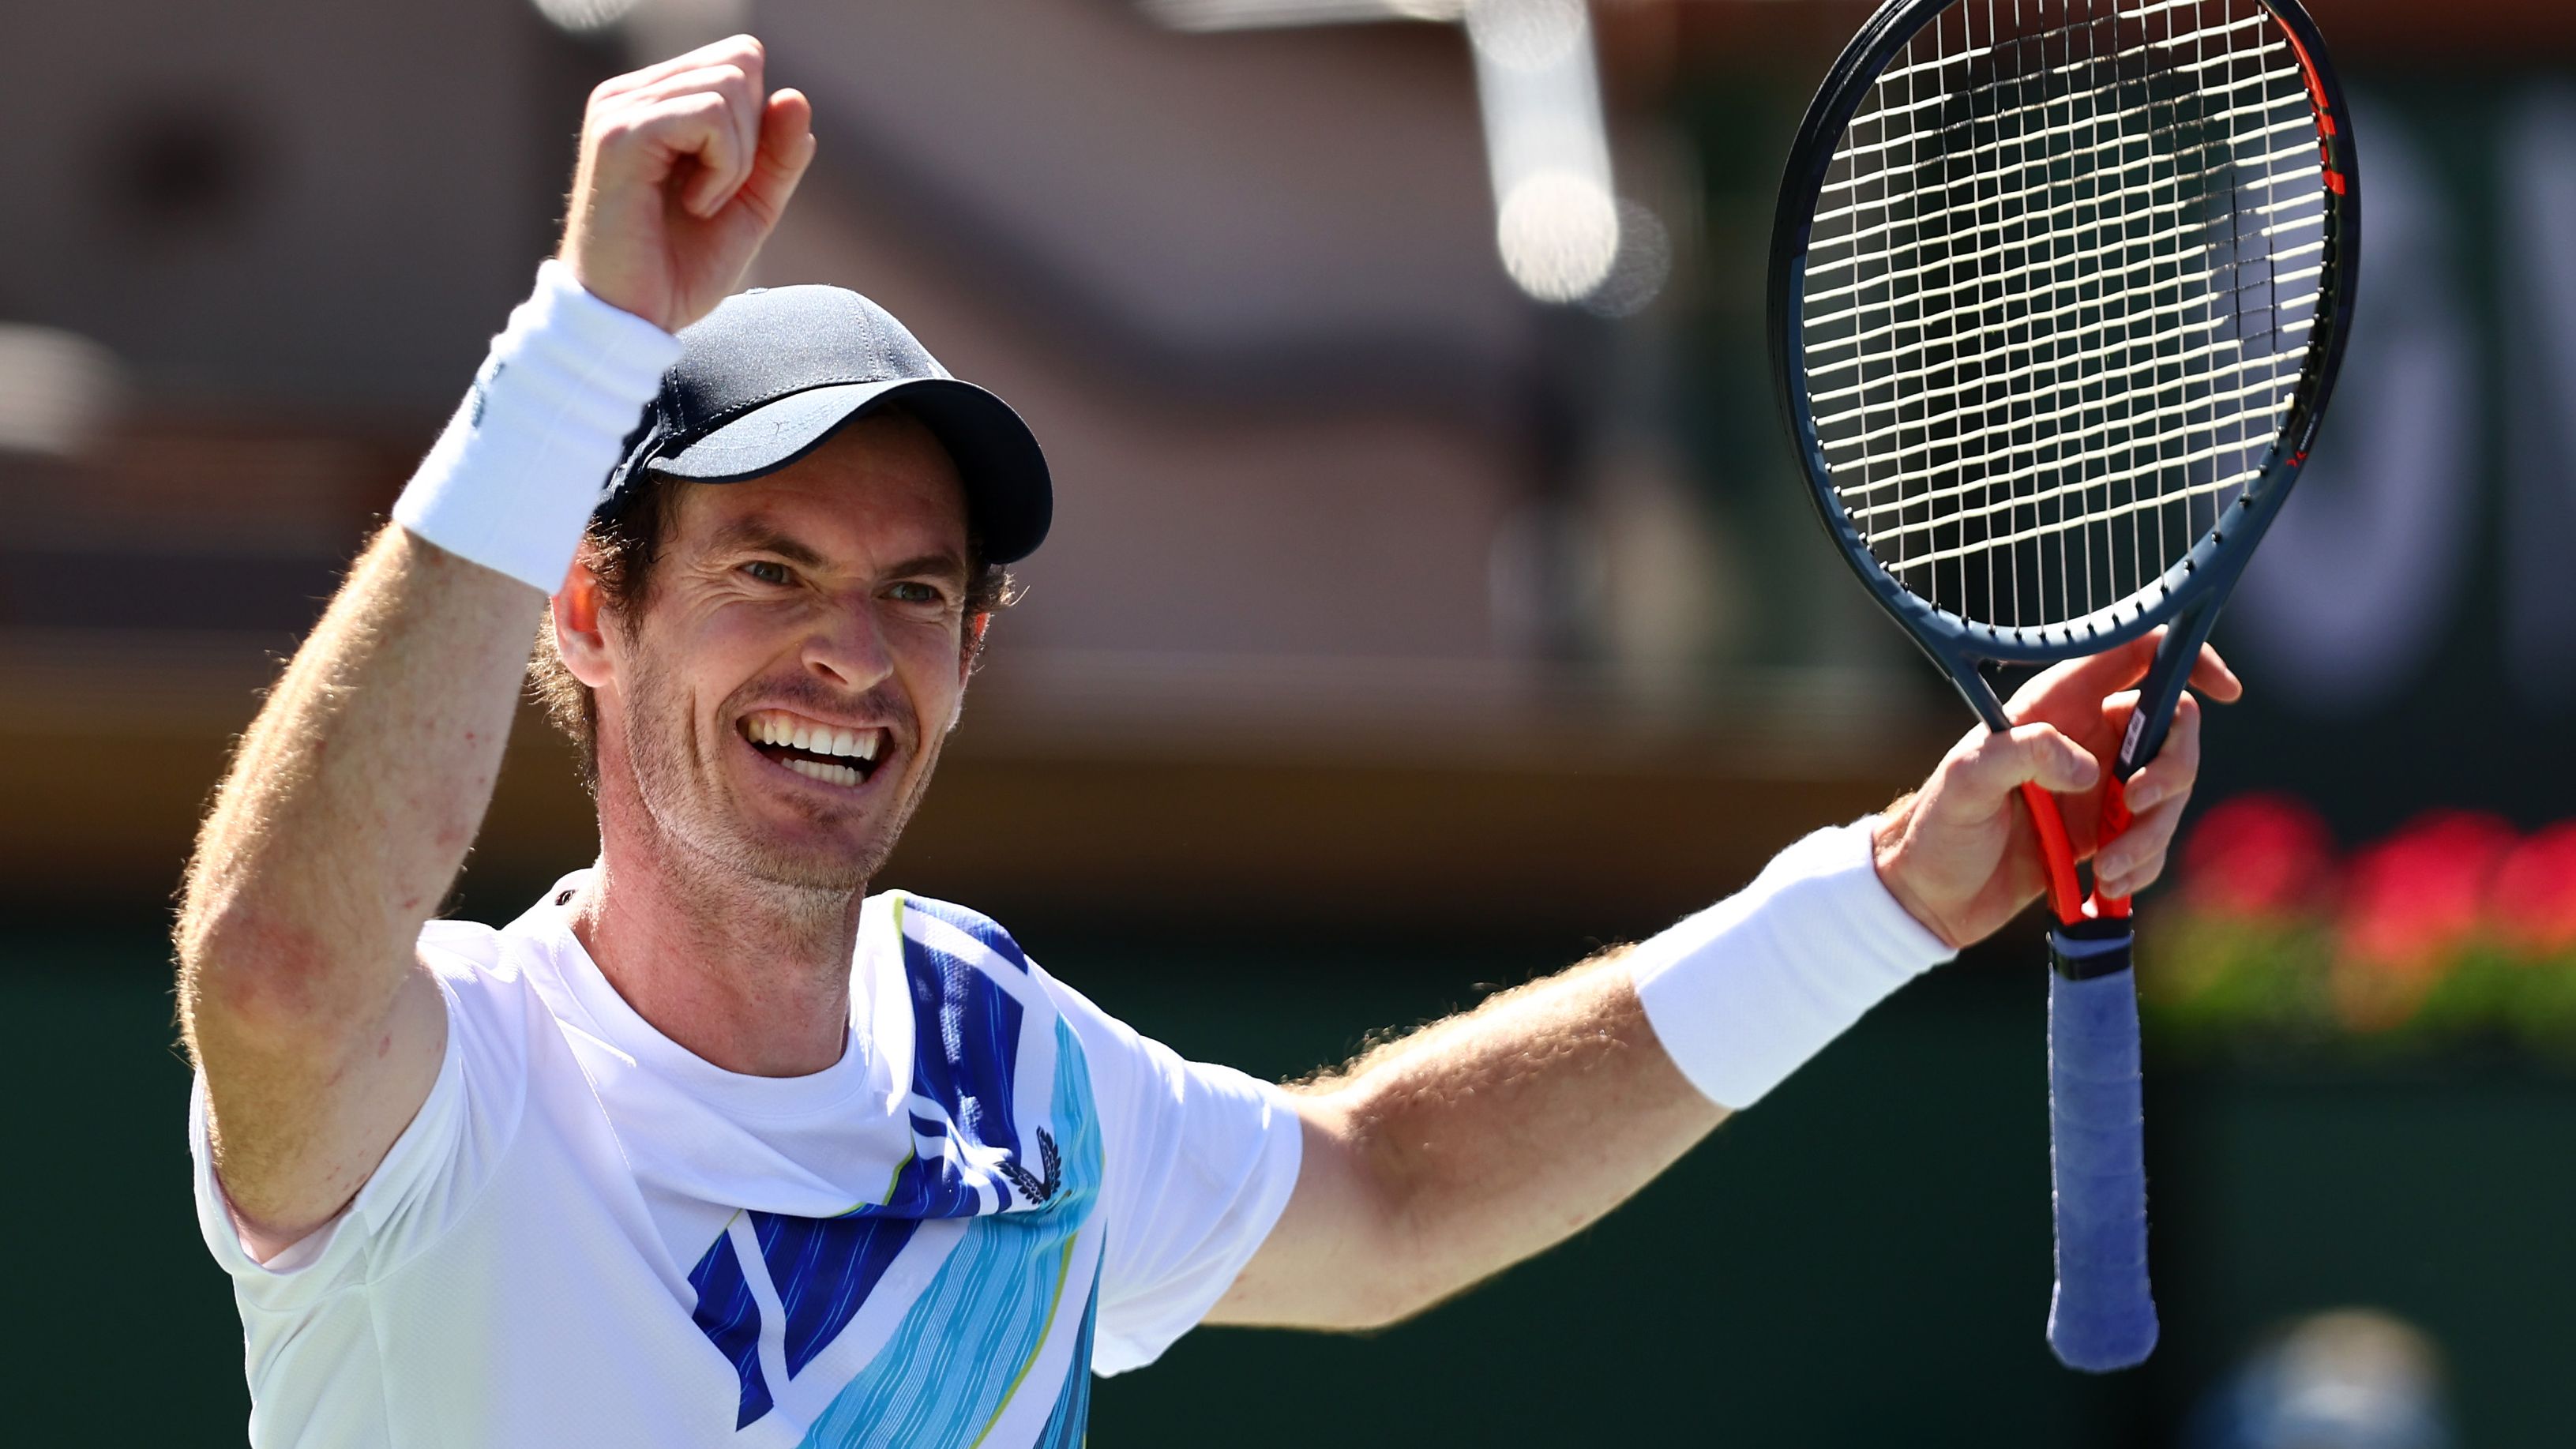 Andy Murray celebrates match point and his 700th tour victory against Taro Daniel.